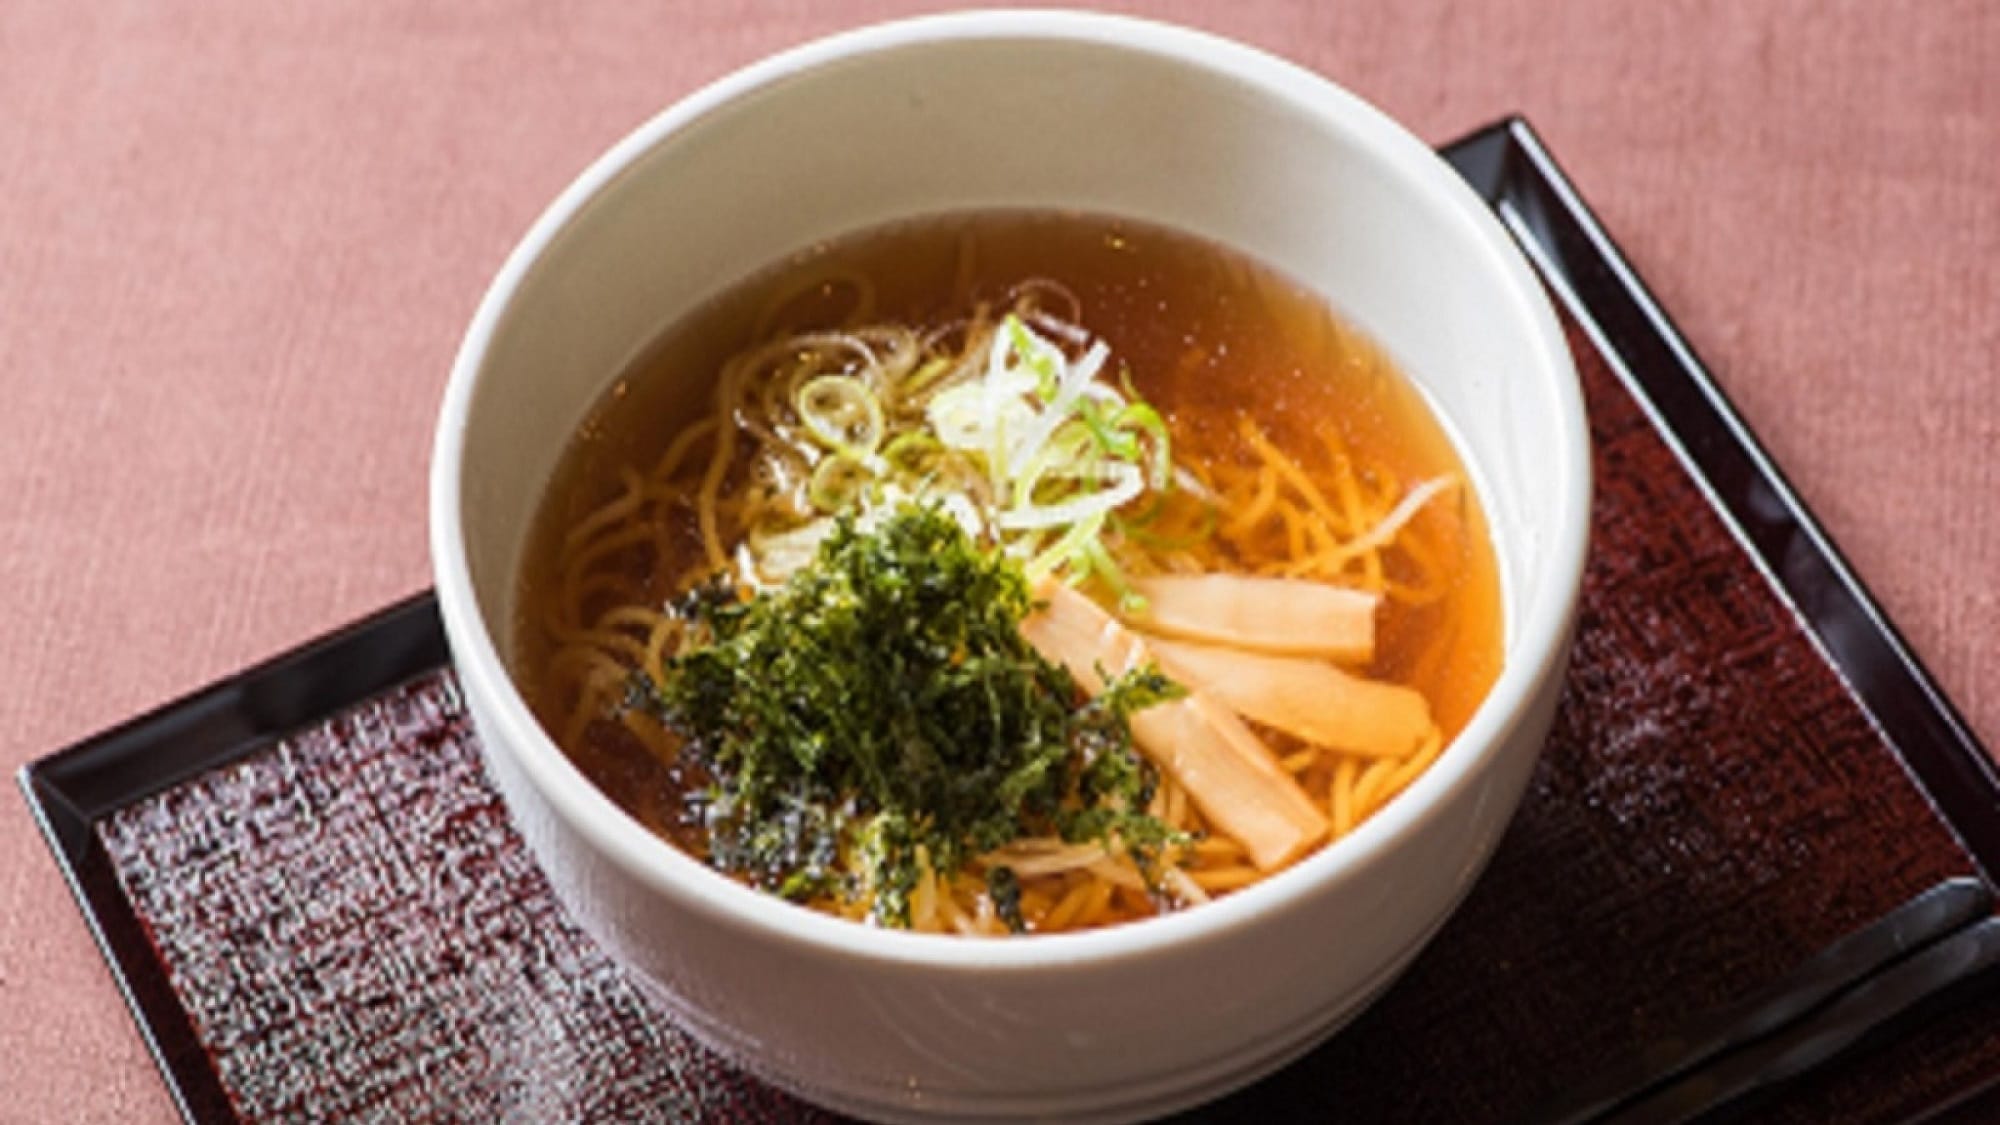 Yonaki soba (free of charge) Open from 21:30 to 23:00